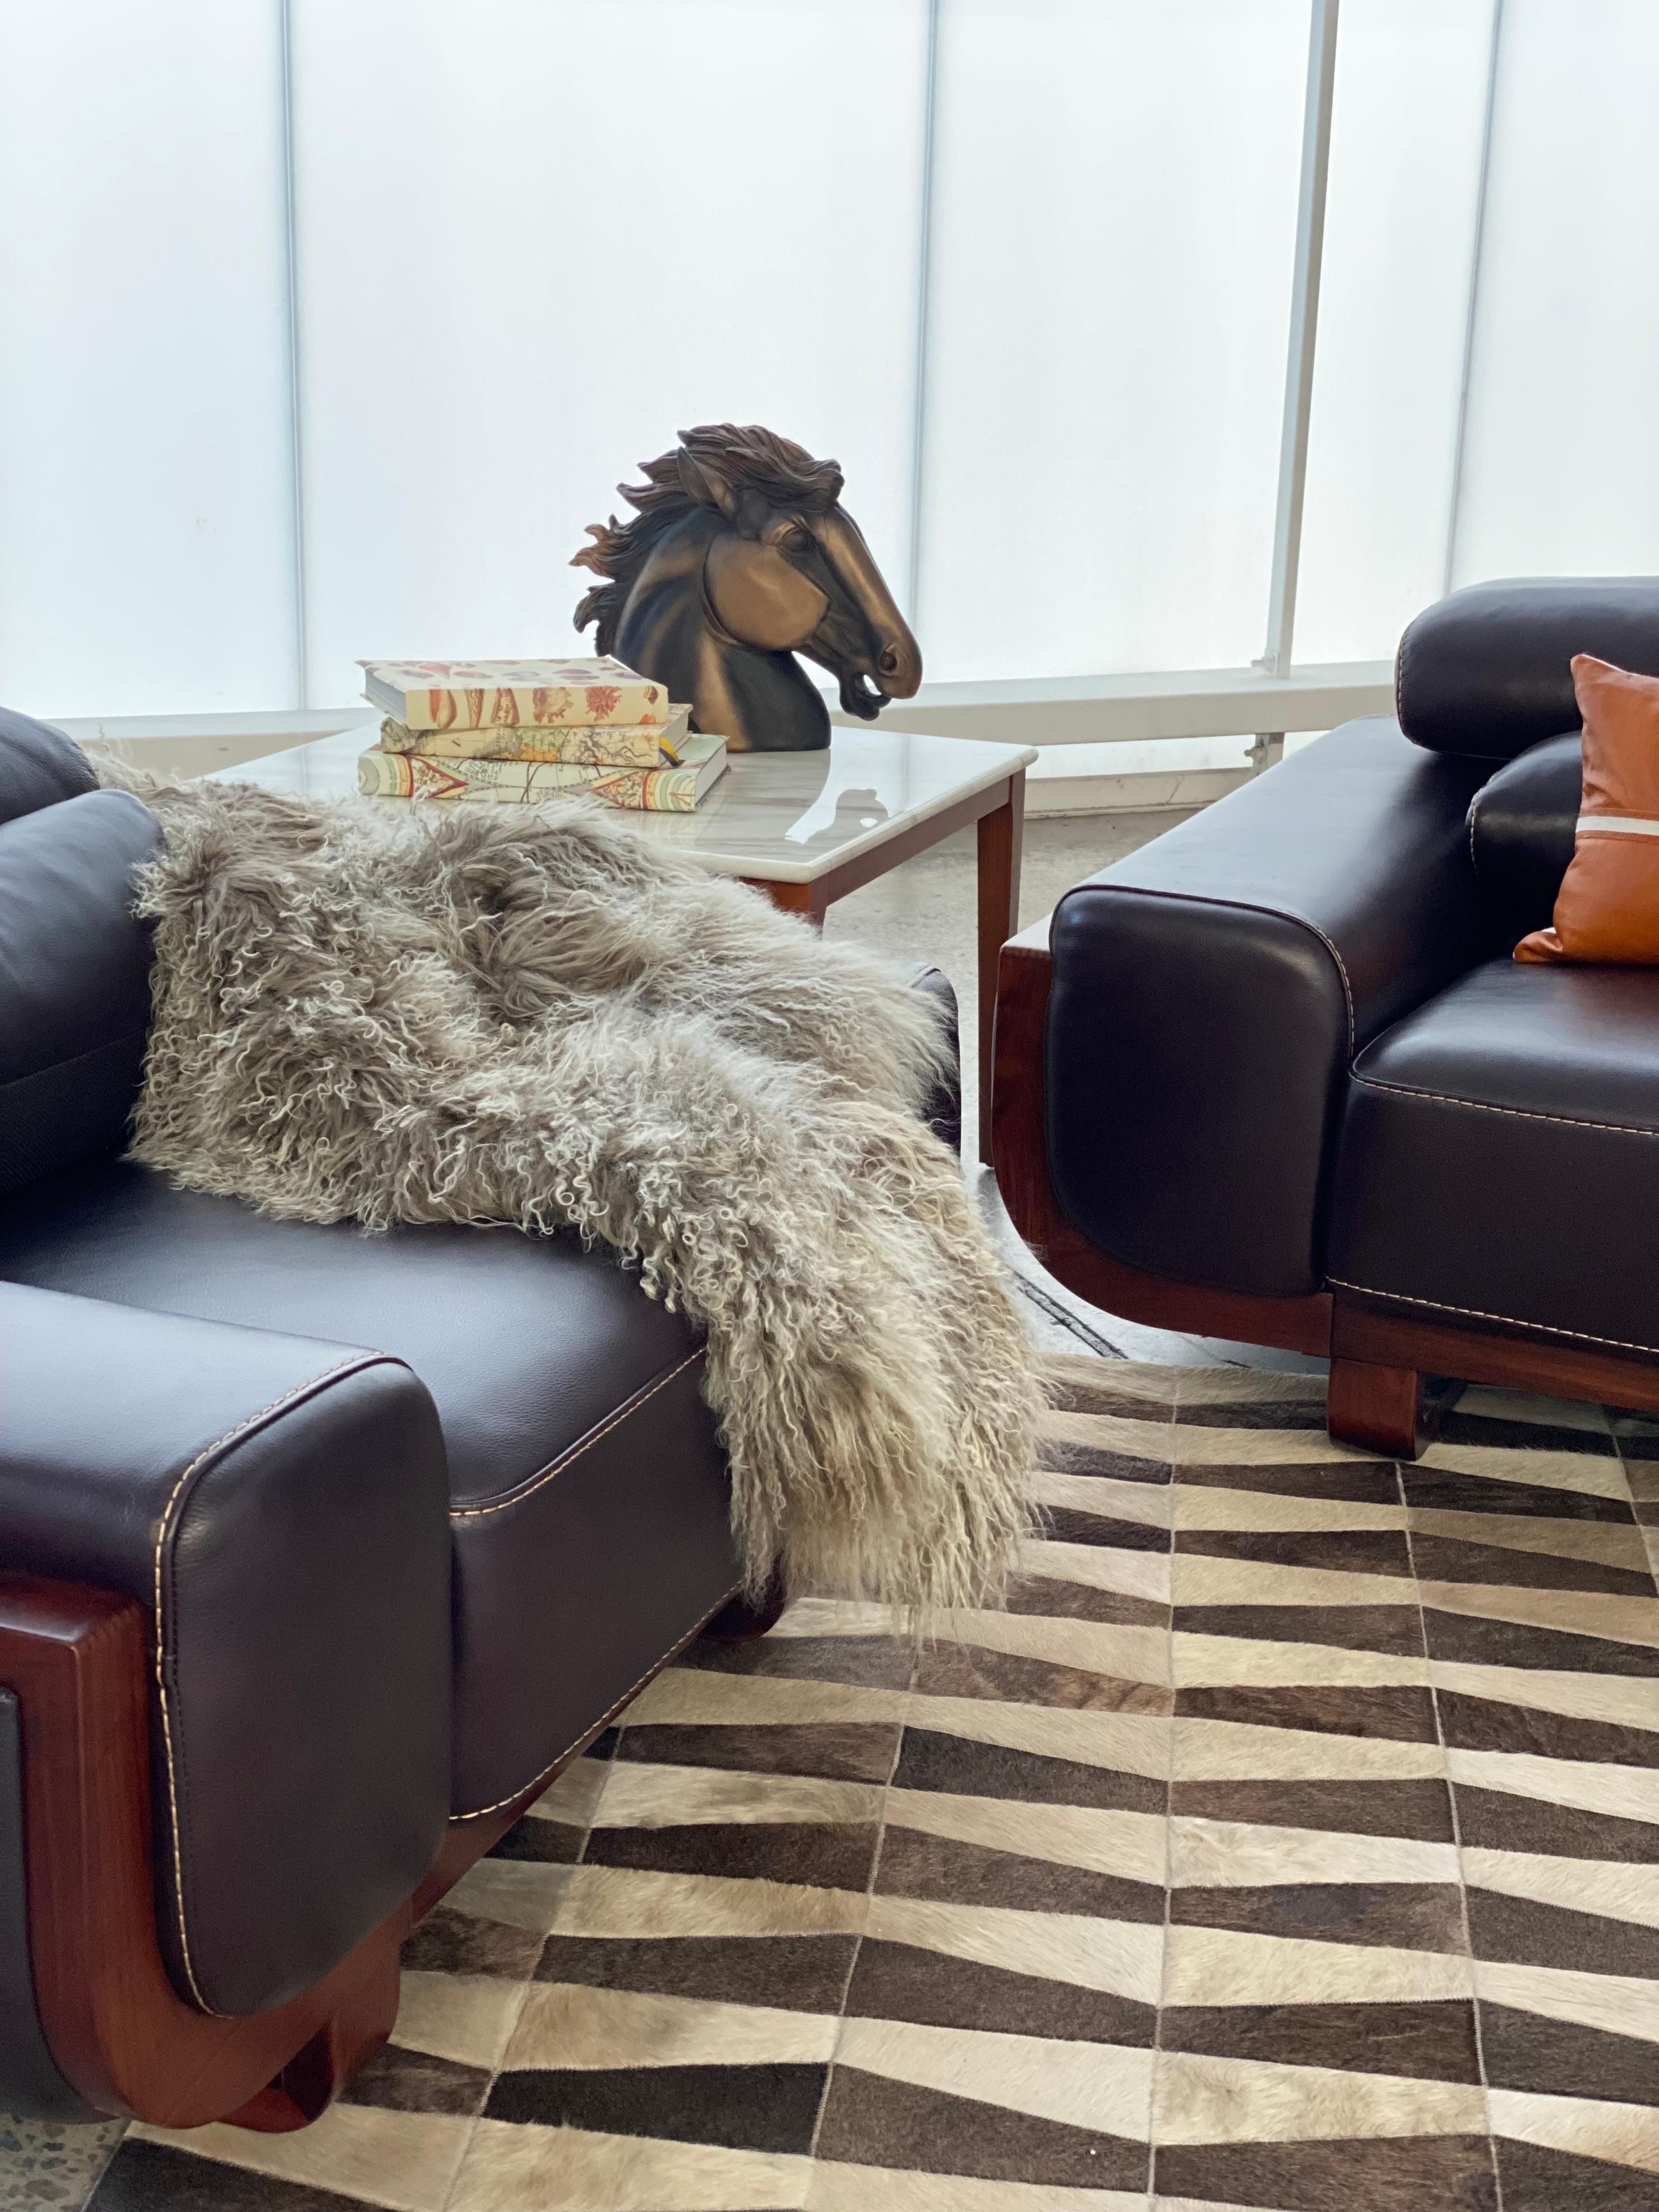 Limited edition, Mongolian fur throw, handcrafted in Australia from exquisite Mongolian sheepskin. The two-tone wool features a deep olive green with contrast-dyed wool tips, creating a beautiful shuffle of color tones. 

Mongolian wool has a silky